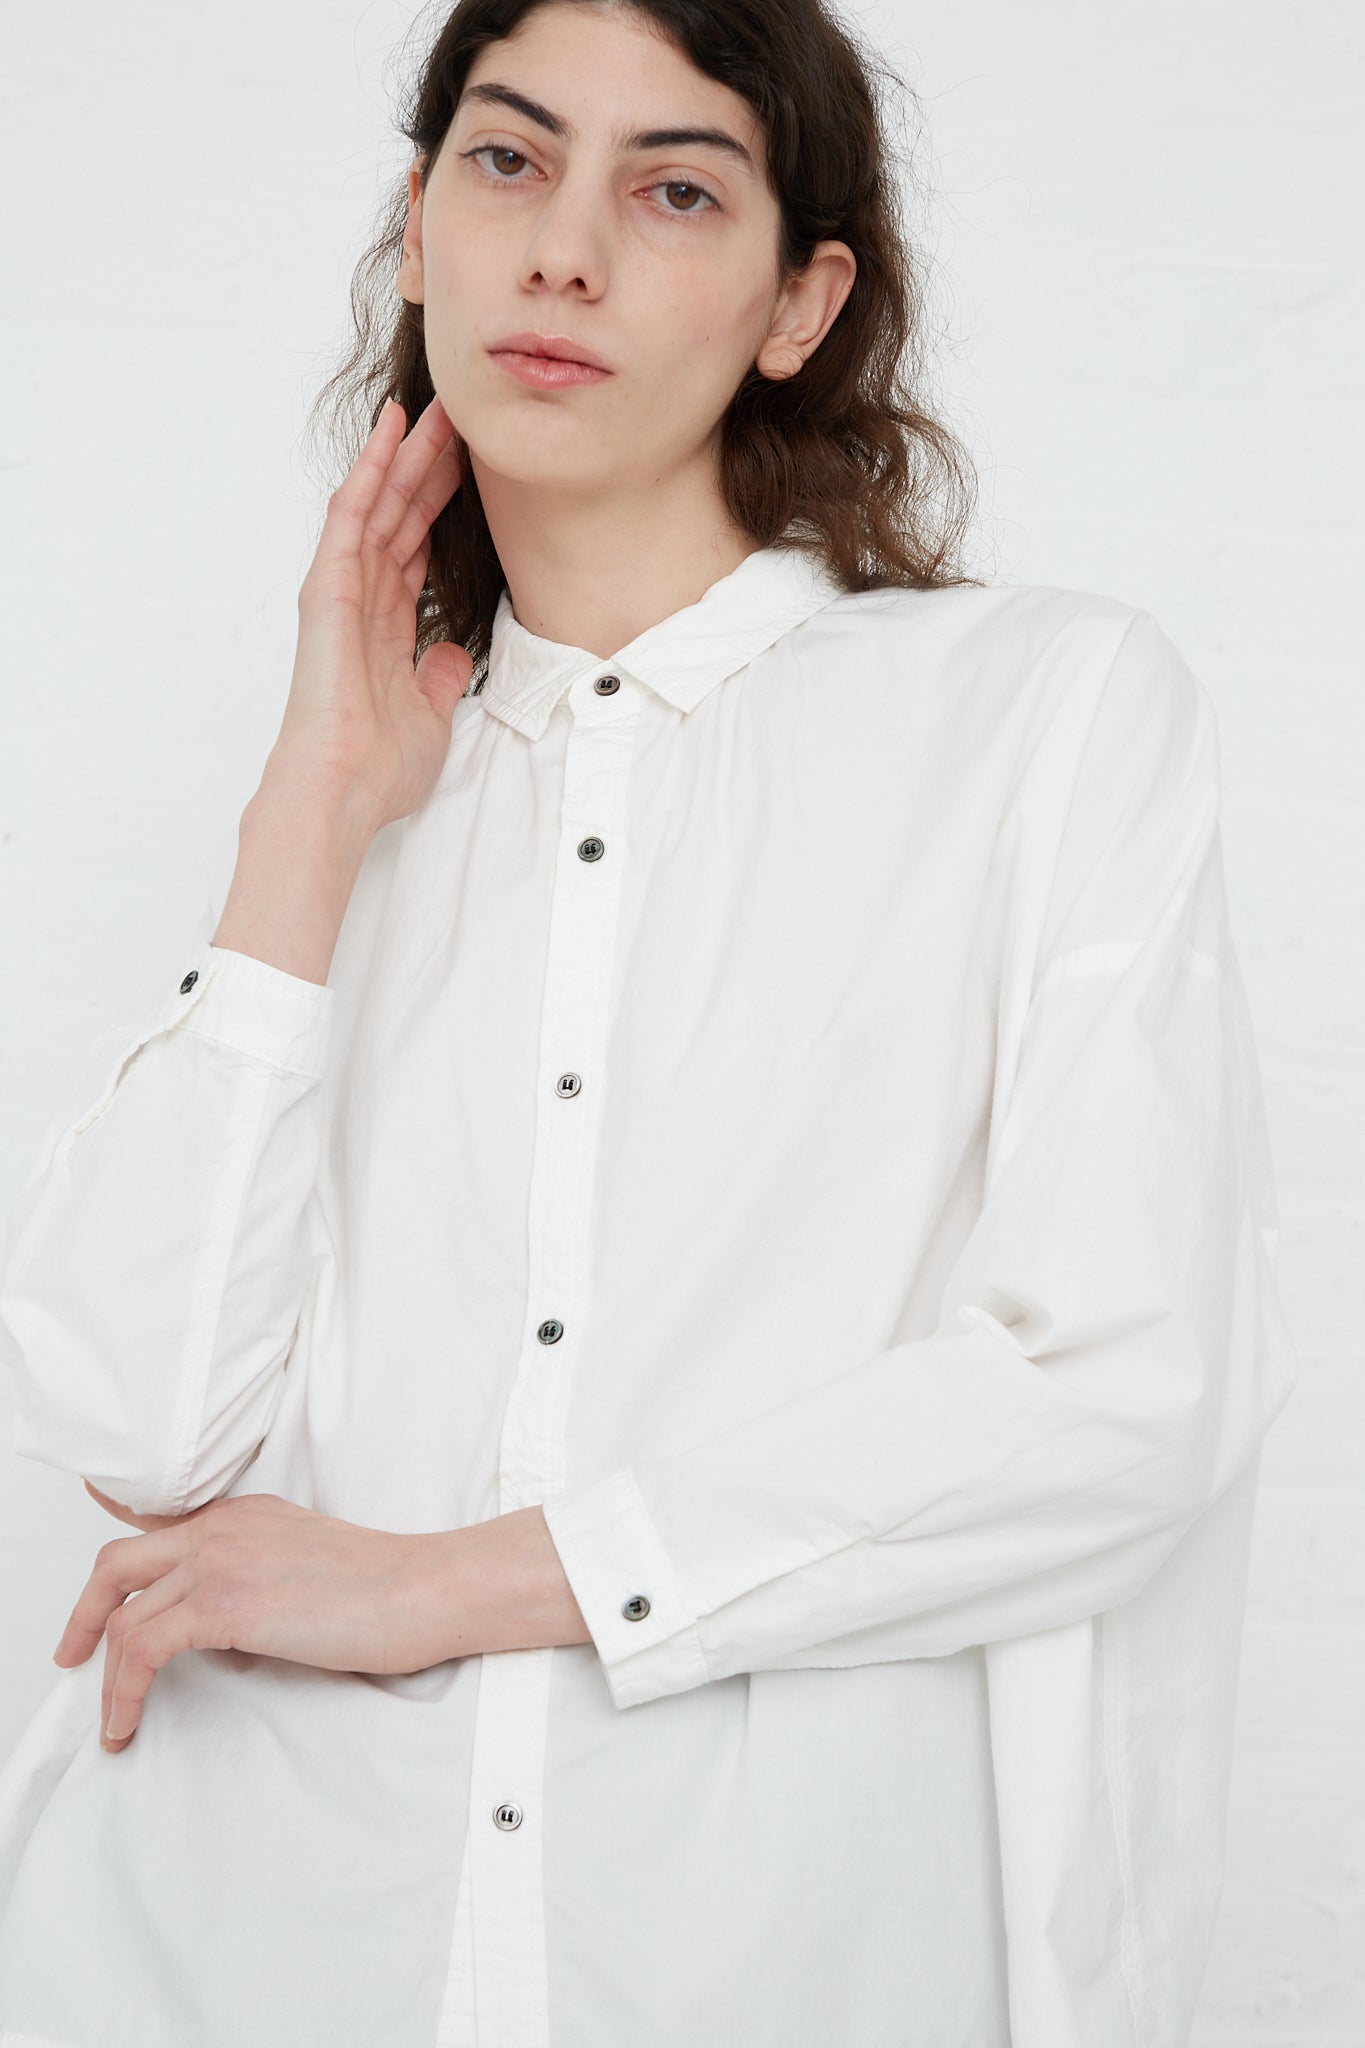 The model is wearing an Ichi Antiquités Woven Cotton Oumisarashi Shirt in White.